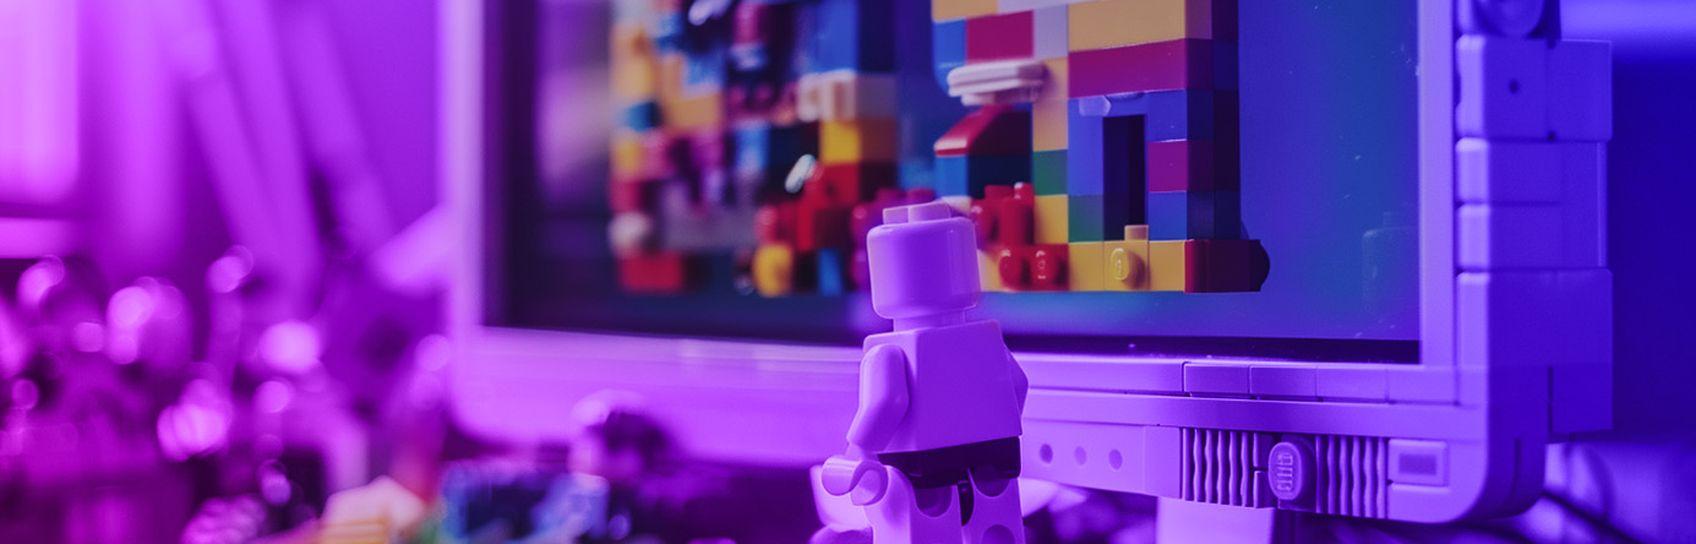 A lego figure building a website using lego on a lego computer monitor